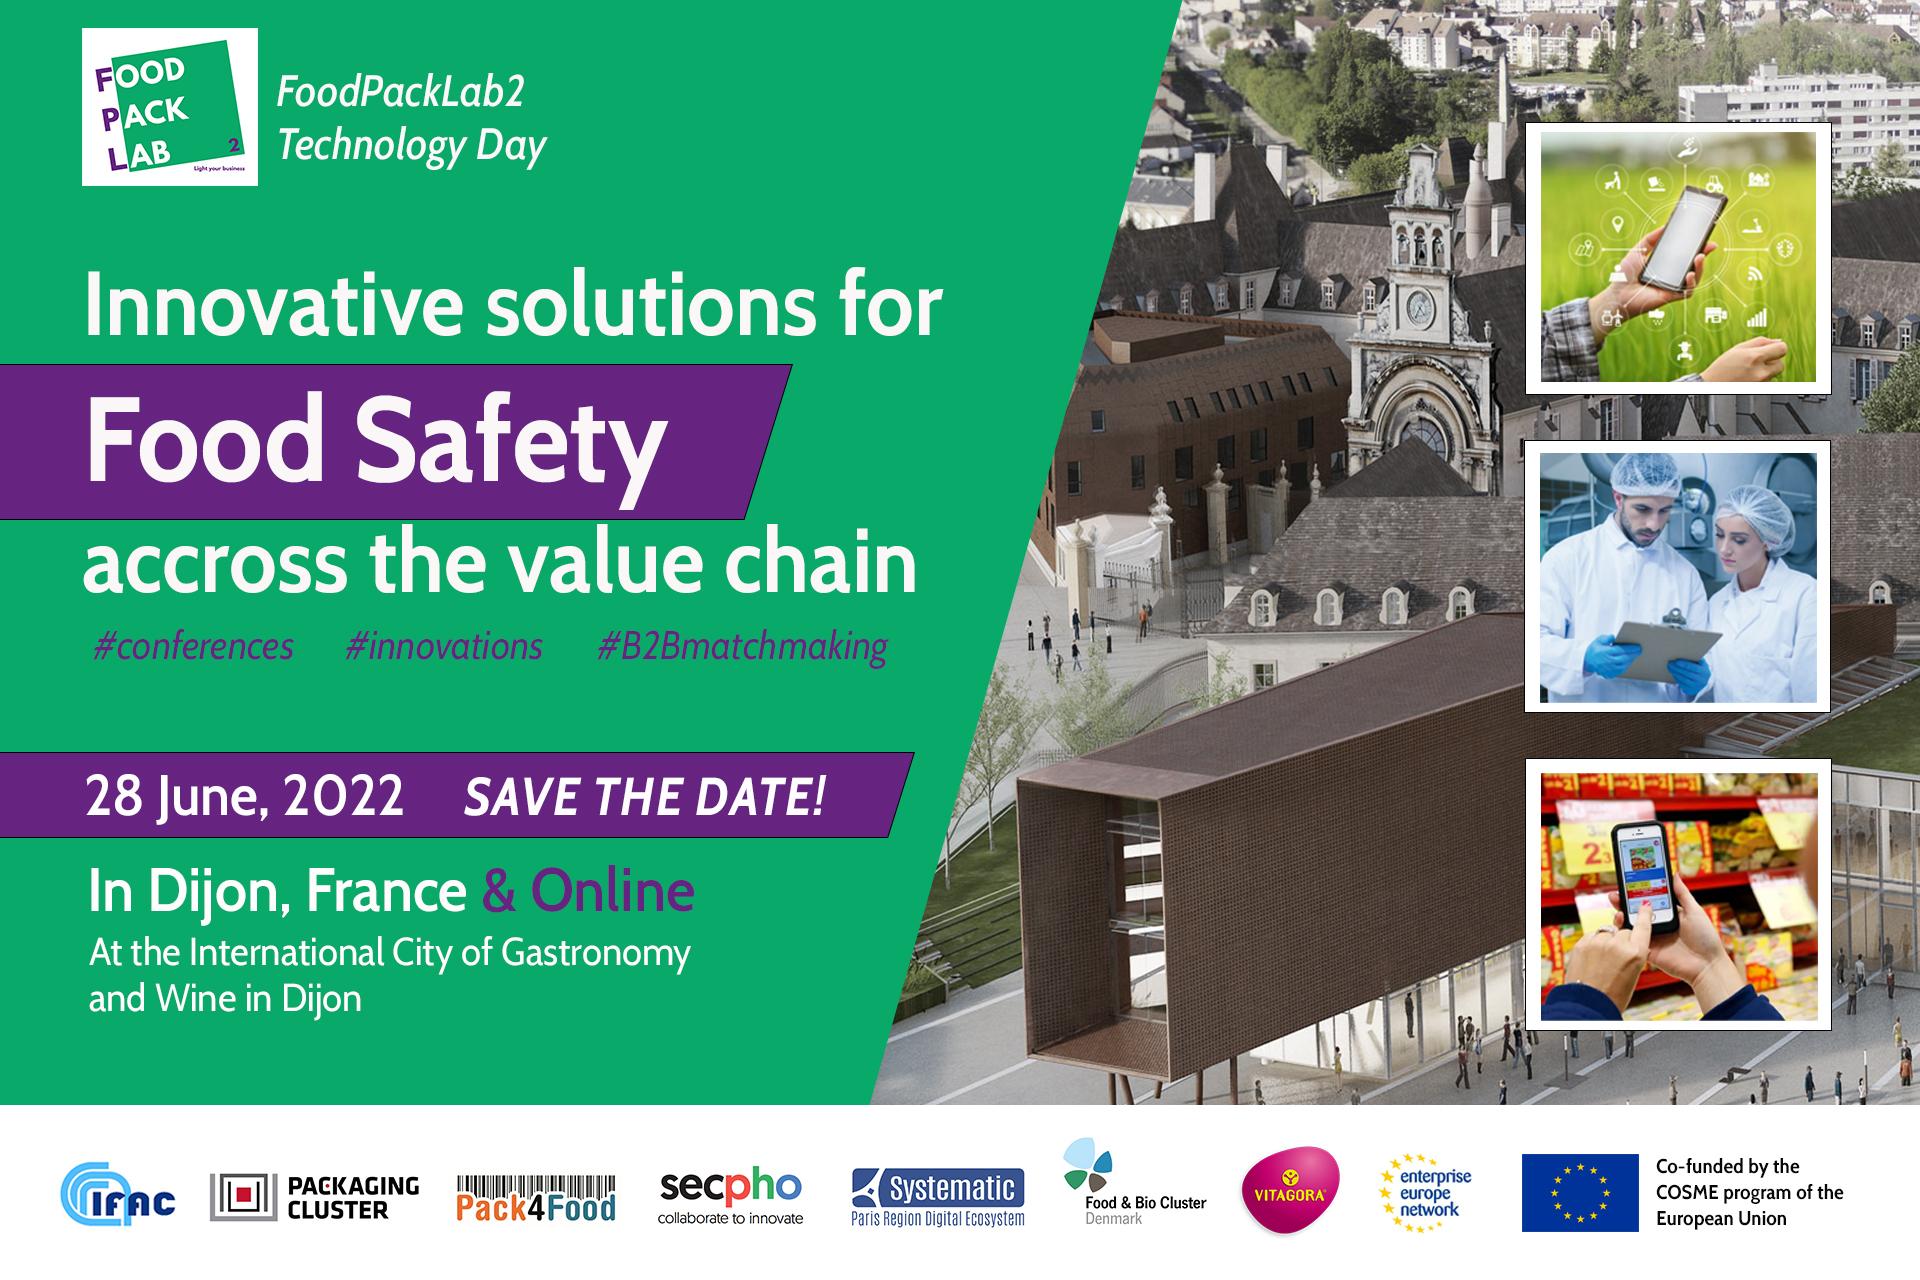 FoodPackLab 2 Final Event: Innovative solutions for food safety accross the value chain!